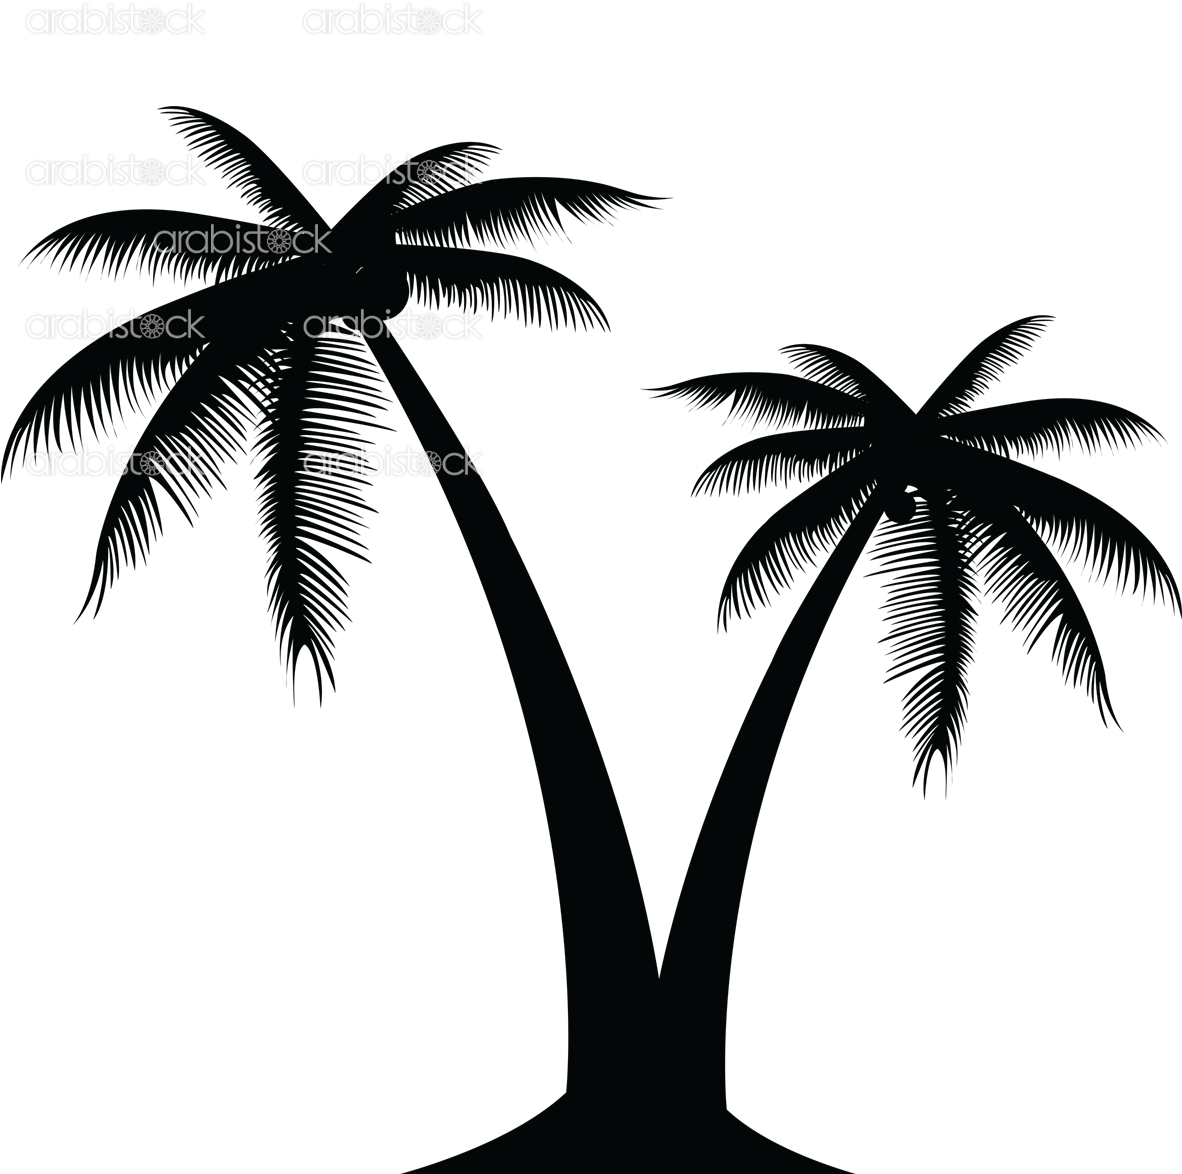 Palm Tree - Transparent Background Palm Tree Png (1181x1181)